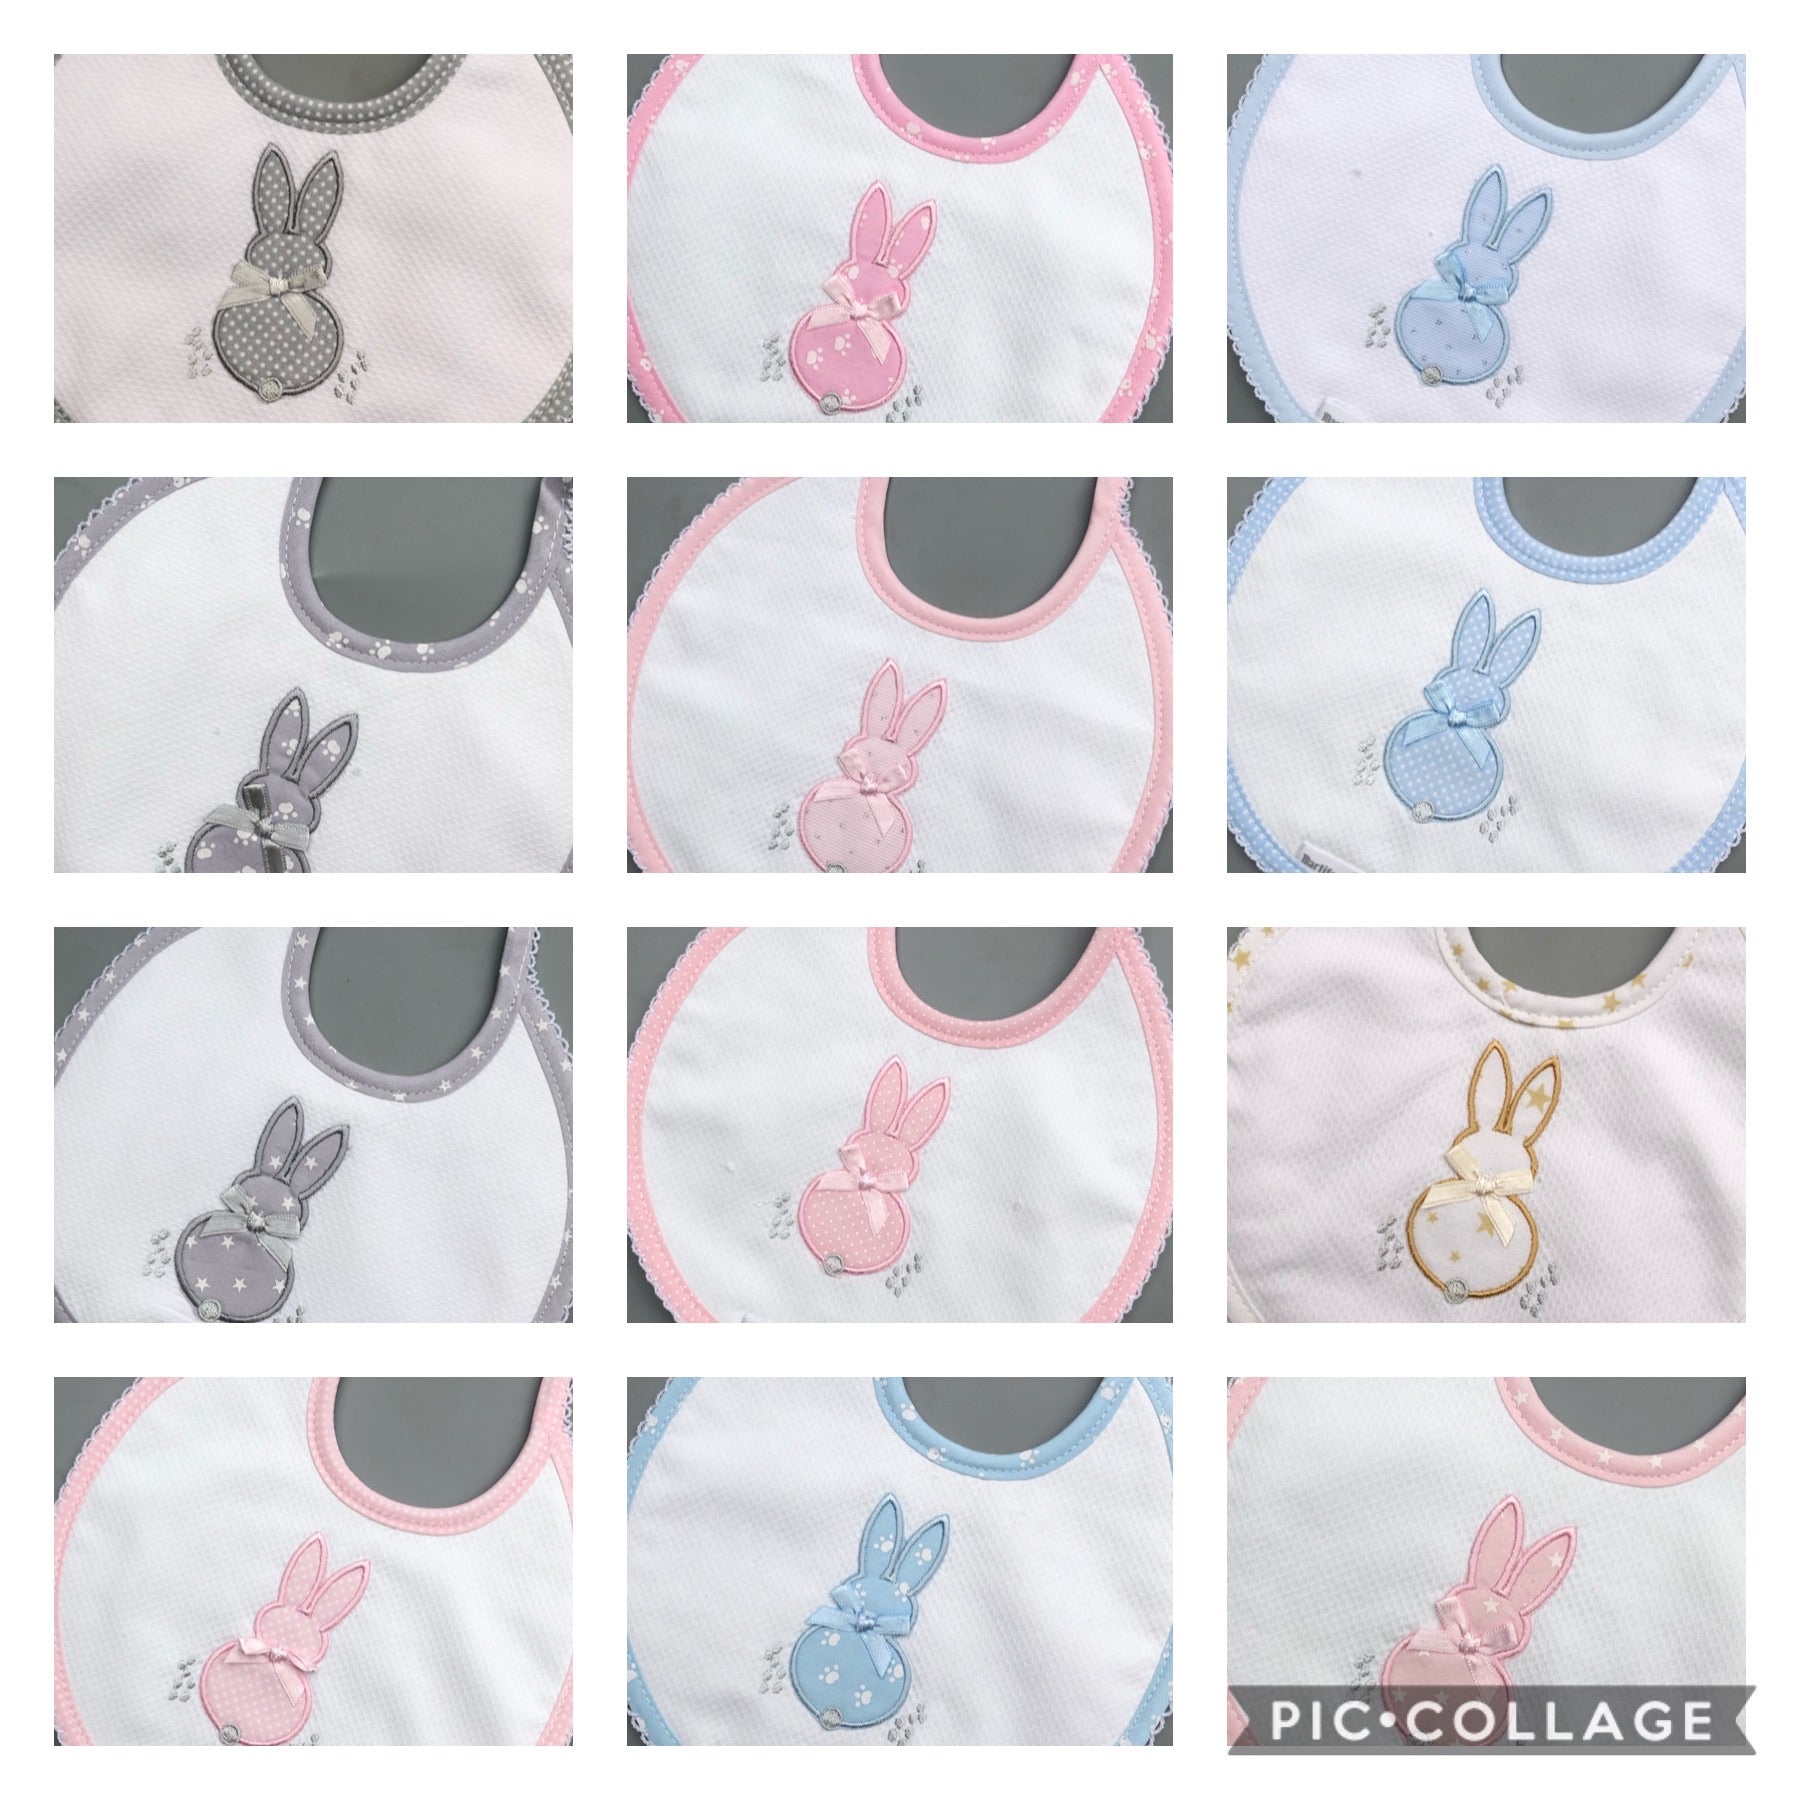 Bunny embroidered bibs -choose your colour BAB5